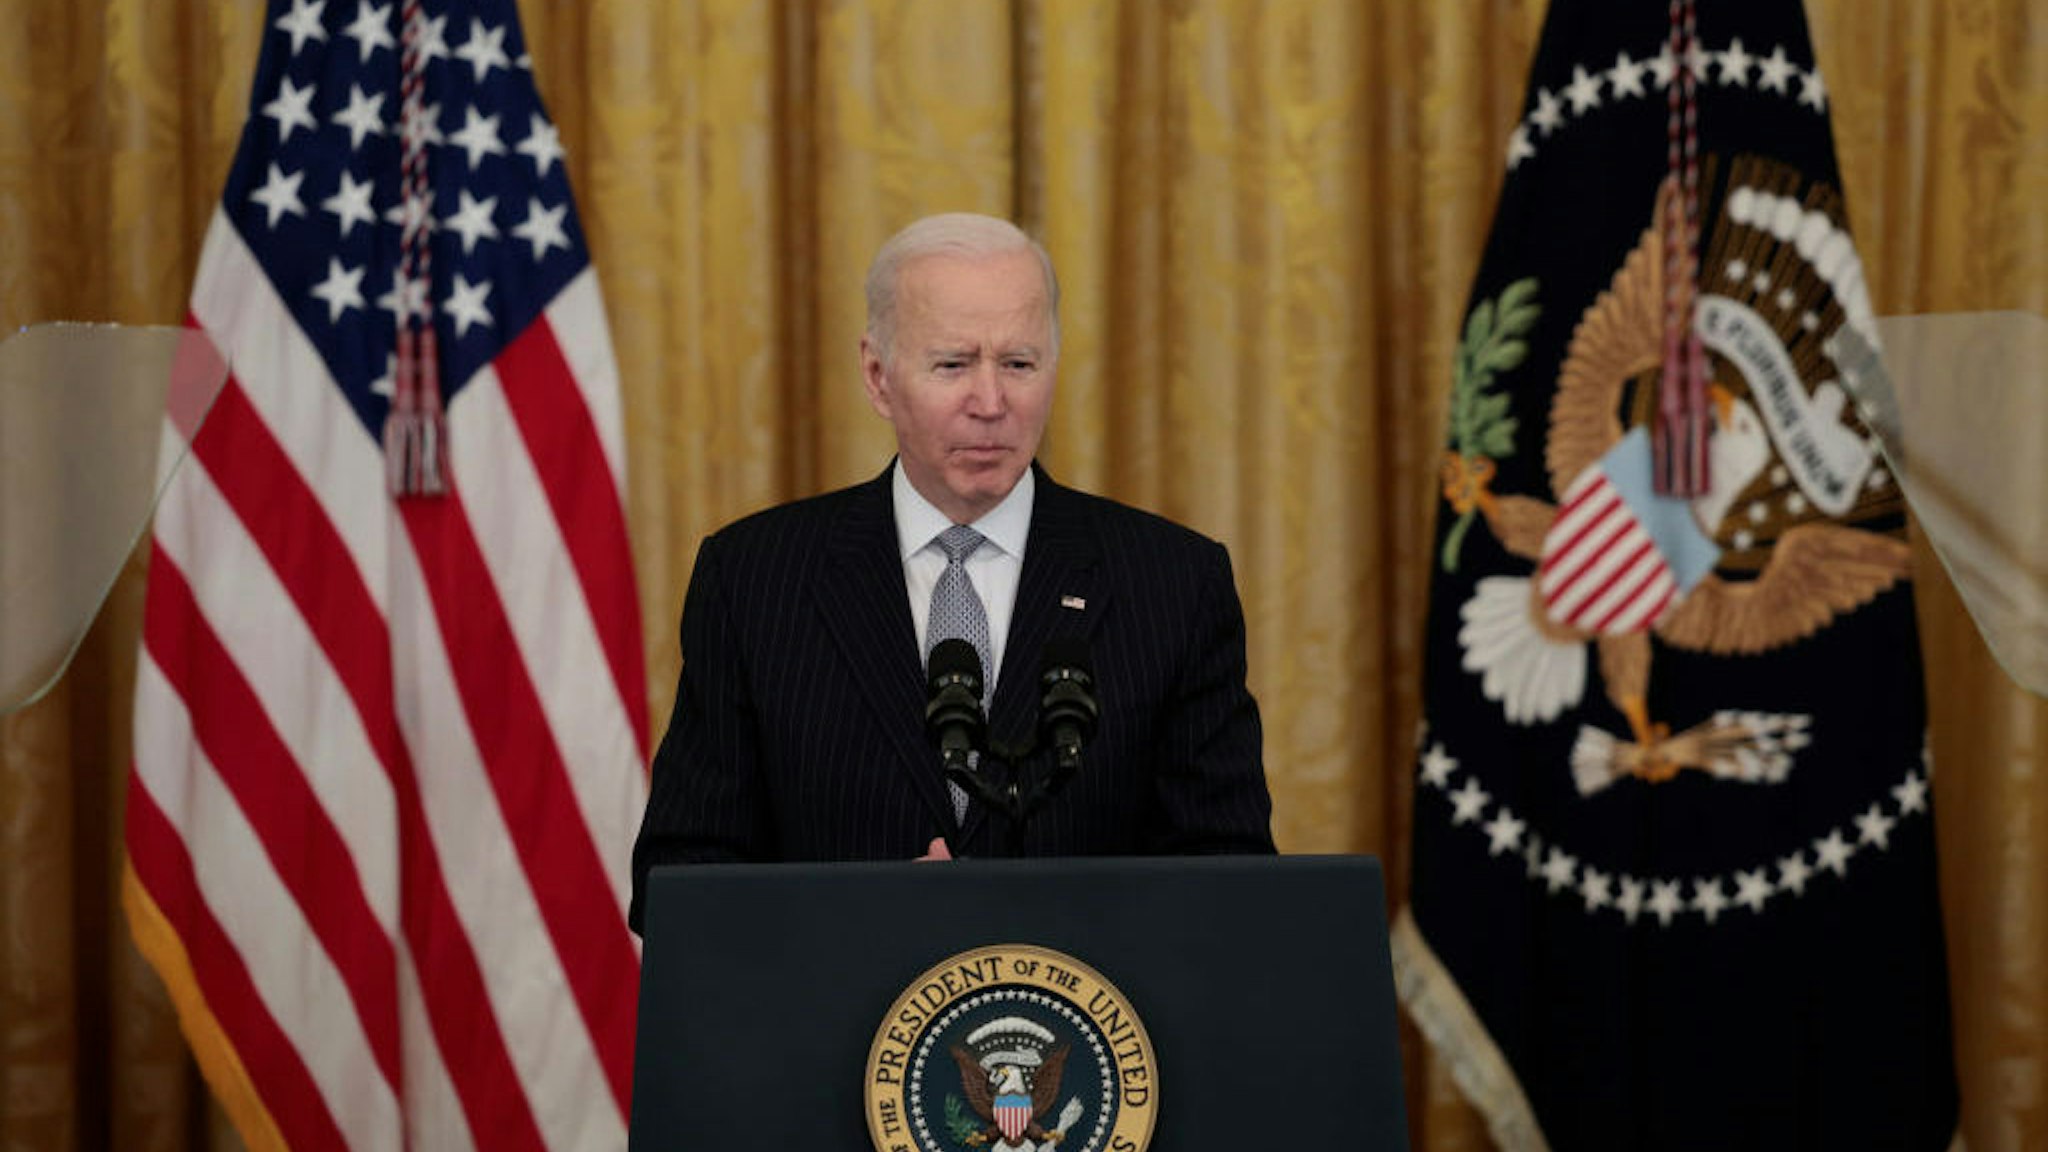 WASHINGTON, DC - FEBRUARY 02: U.S. President Joe Biden gives remarks during a Cancer Moonshot initiative event in the East Room of the White House on February 02, 2022 in Washington, DC. During the event, President Biden announced the administration’s new goals for the initiative that includes reducing the death rate from cancer over the next 25 years and improving the quality of life for people who have survived cancer or are living with it. The initiative was started by Biden when he was the Vice President in 2016. (Photo by Anna Moneymaker/Getty Images)